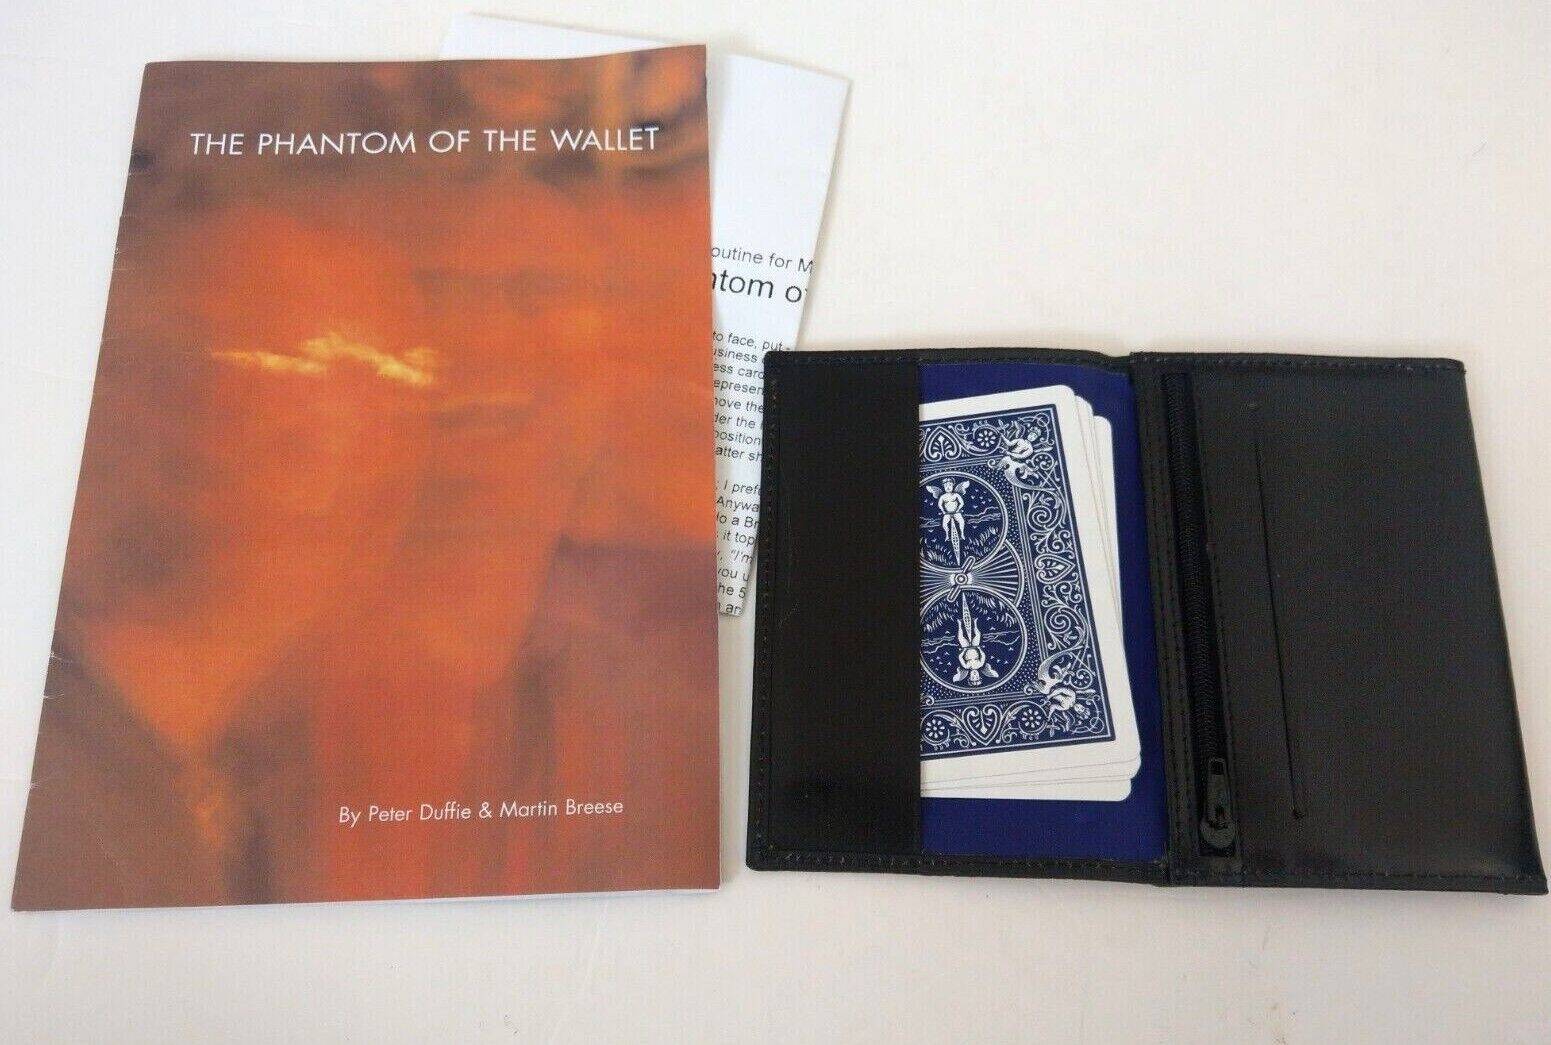 The Phantom of the Wallet by Peter Duffie and Martin Breese with blue bicycle cards inside